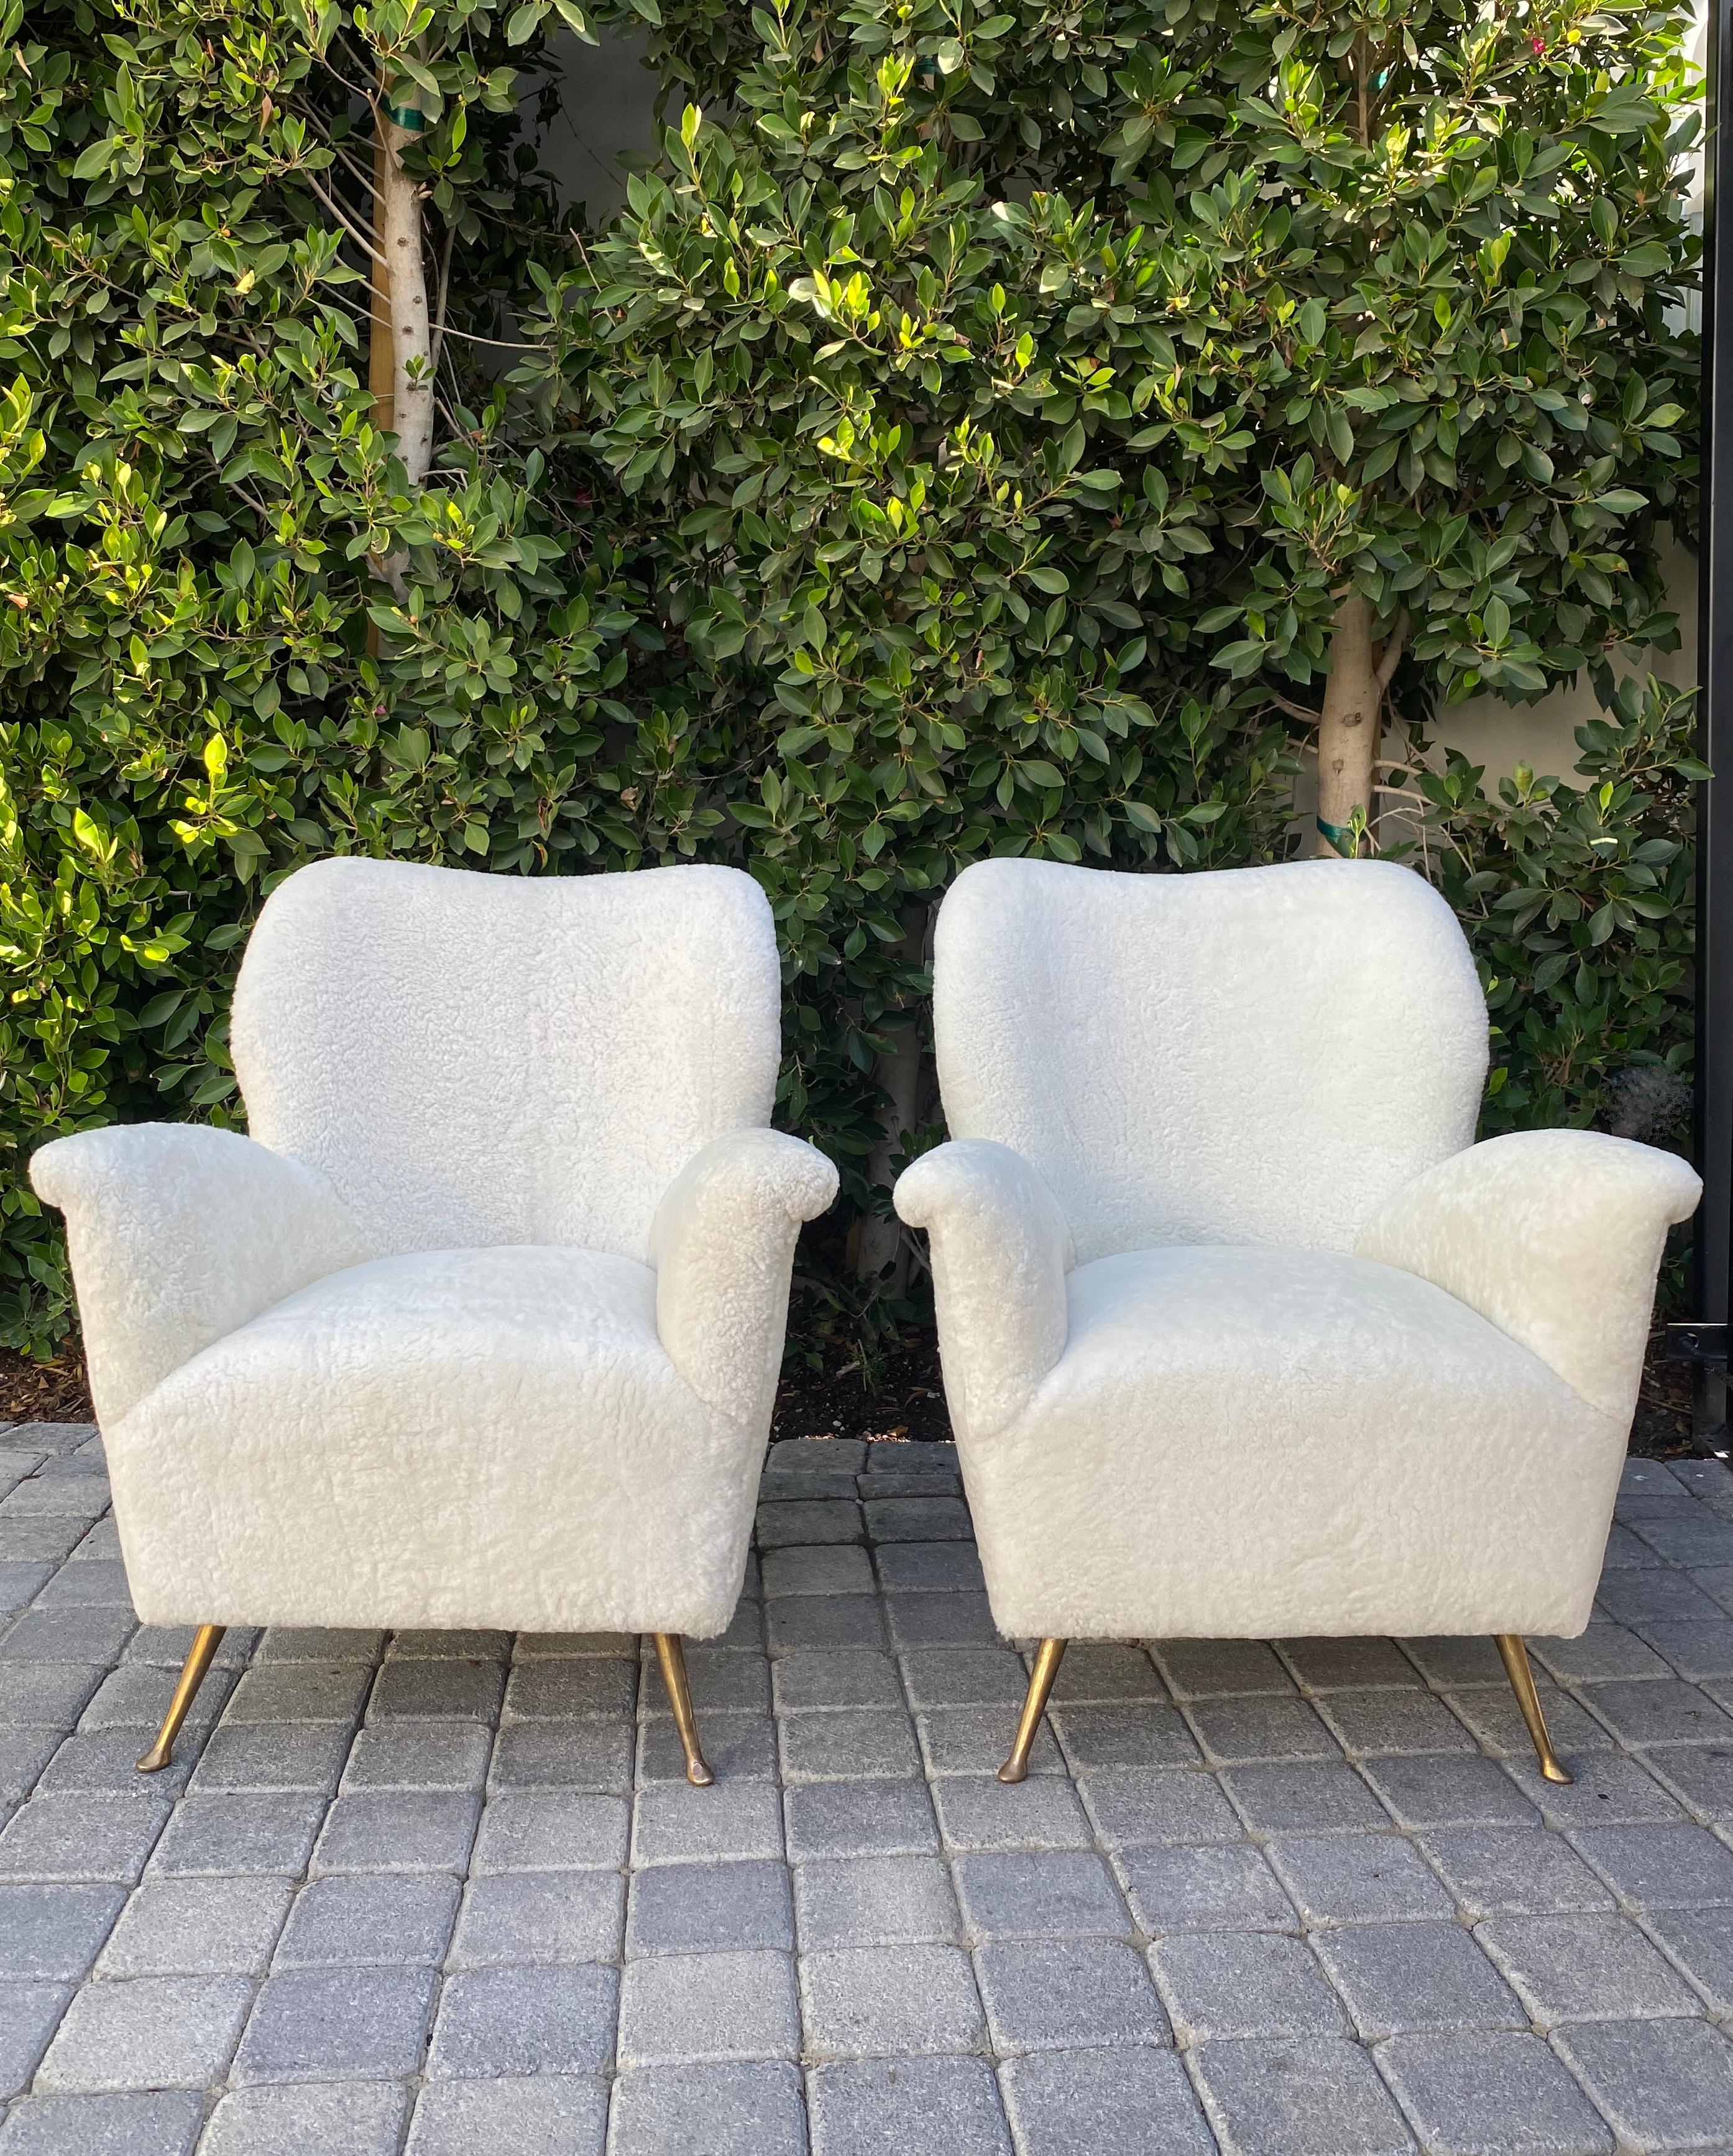 Pair of curved midcentury lounge chairs in white curly shearling reimagined from original Isa Bergamo form with solid brass legs.